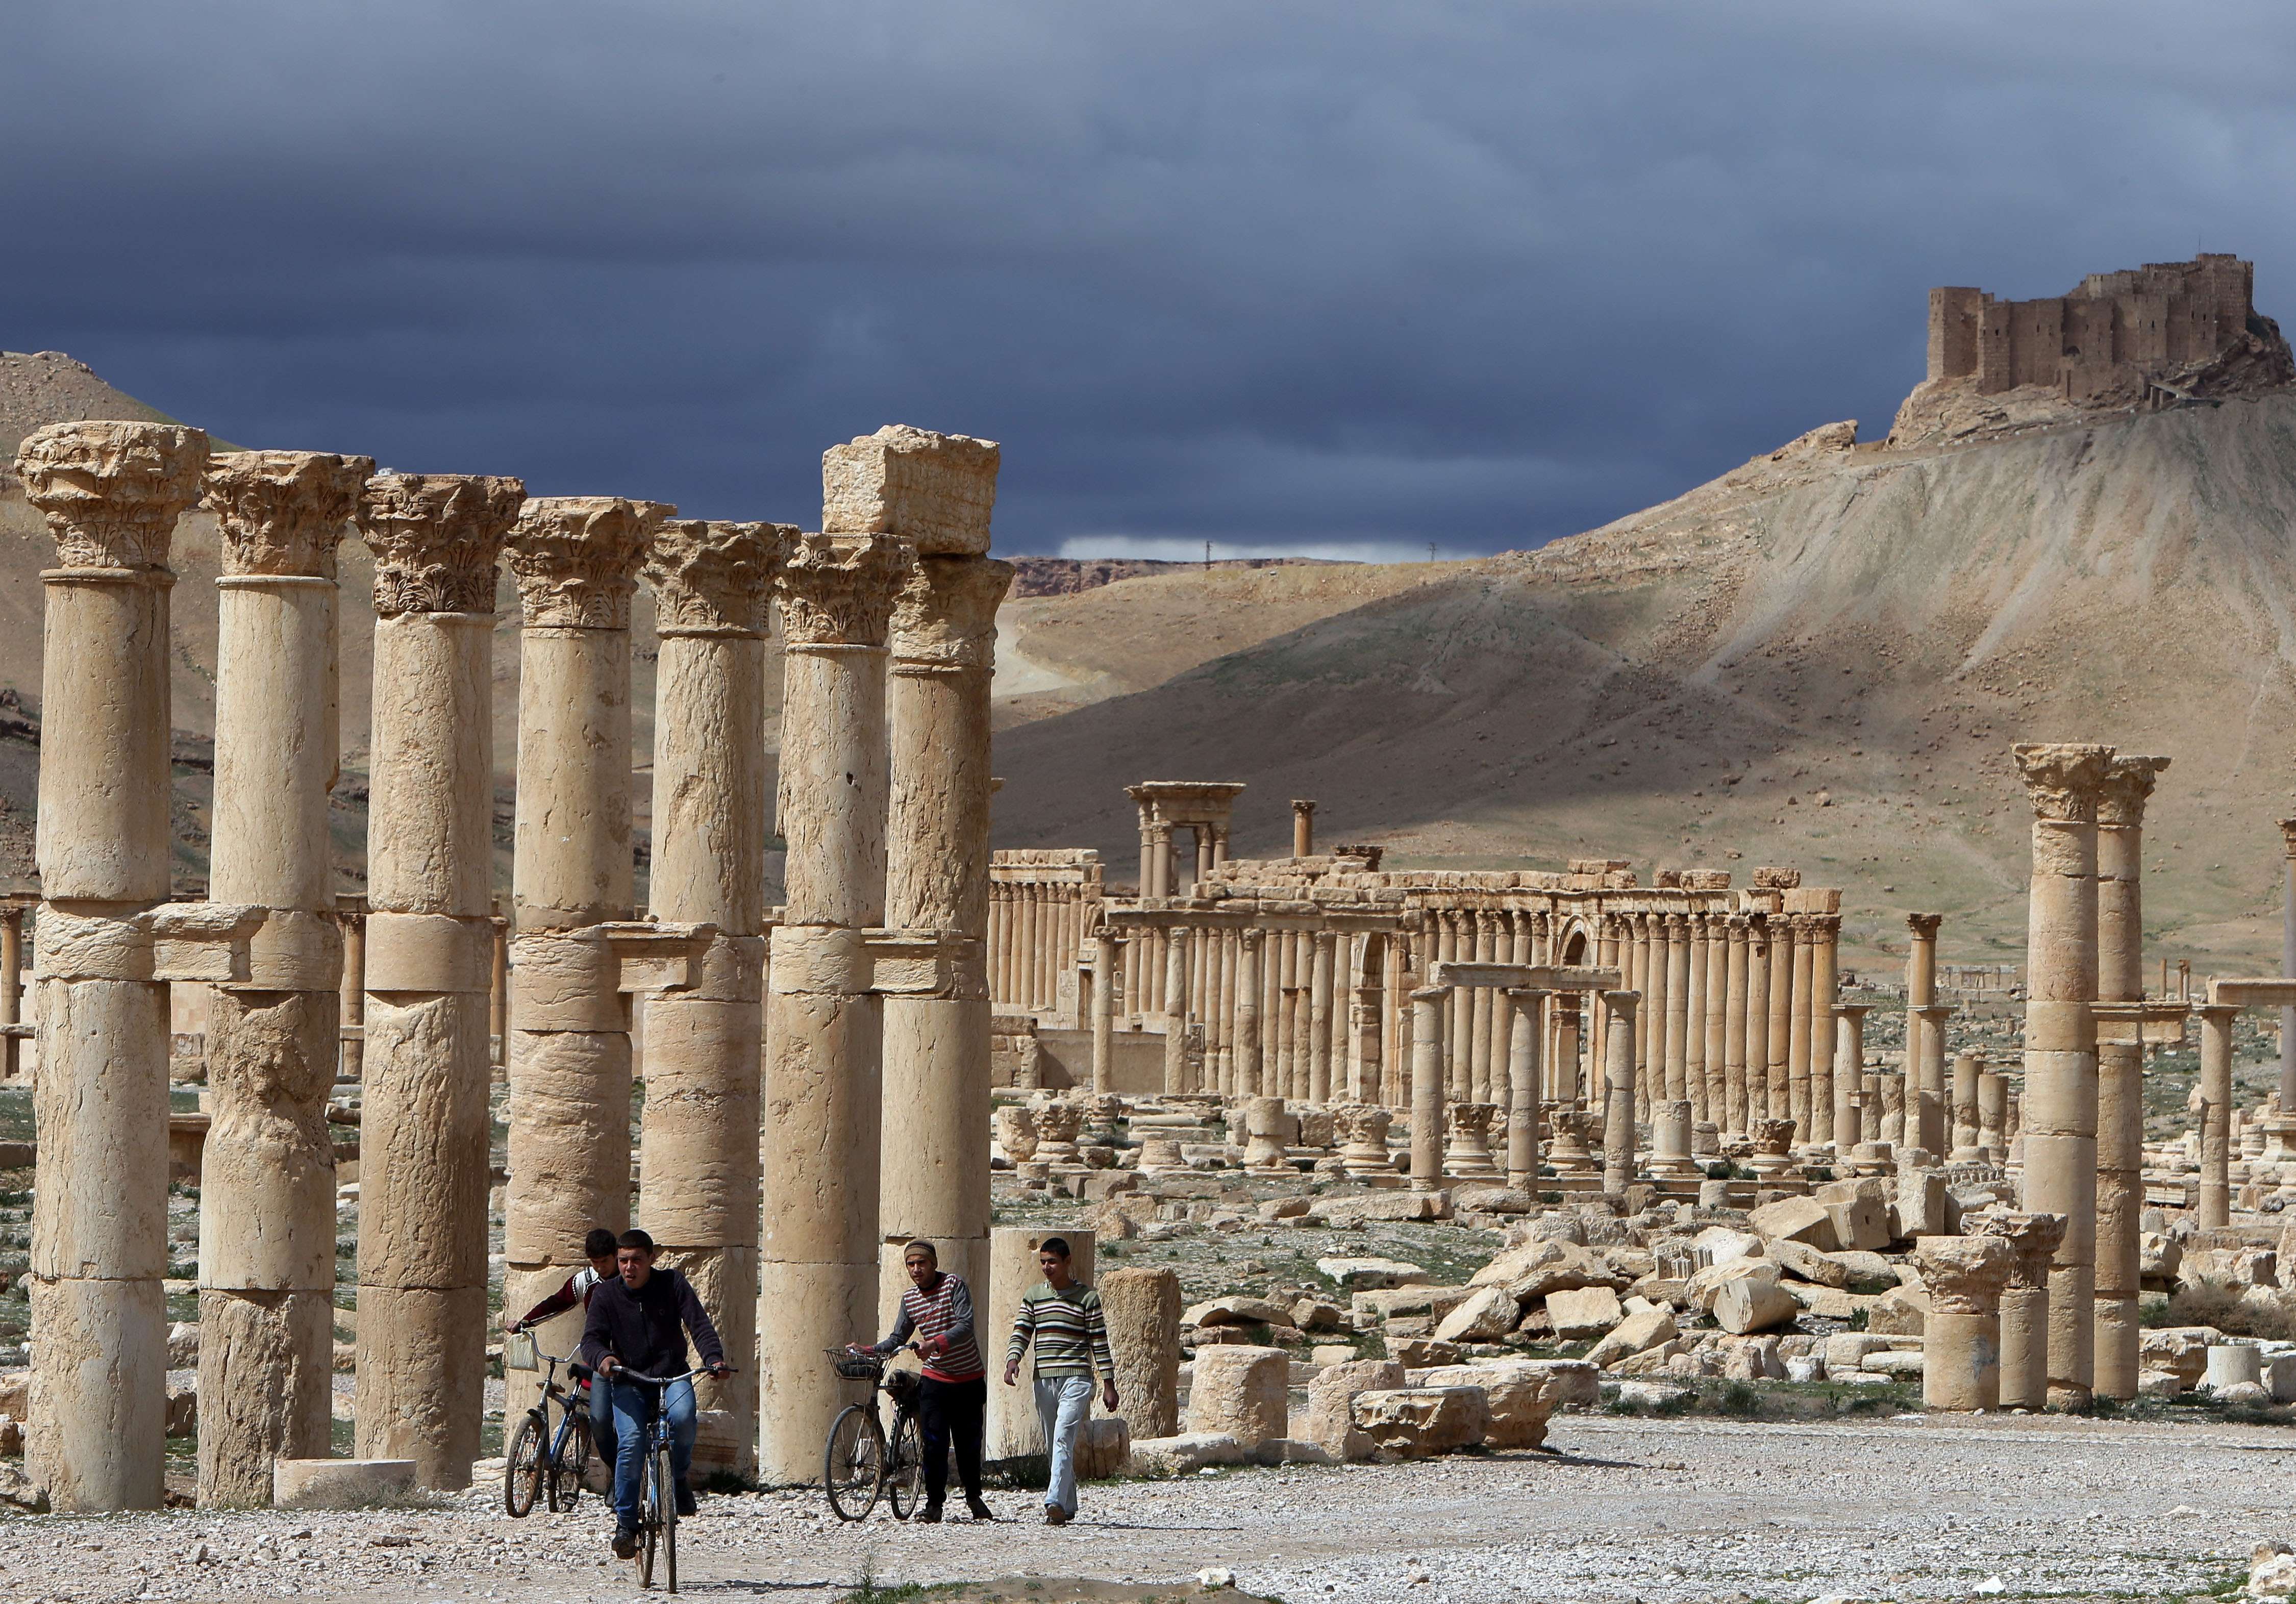 SYRIA-CONFLICT-ARCHAEOLOGY-PALMYRA-FILES